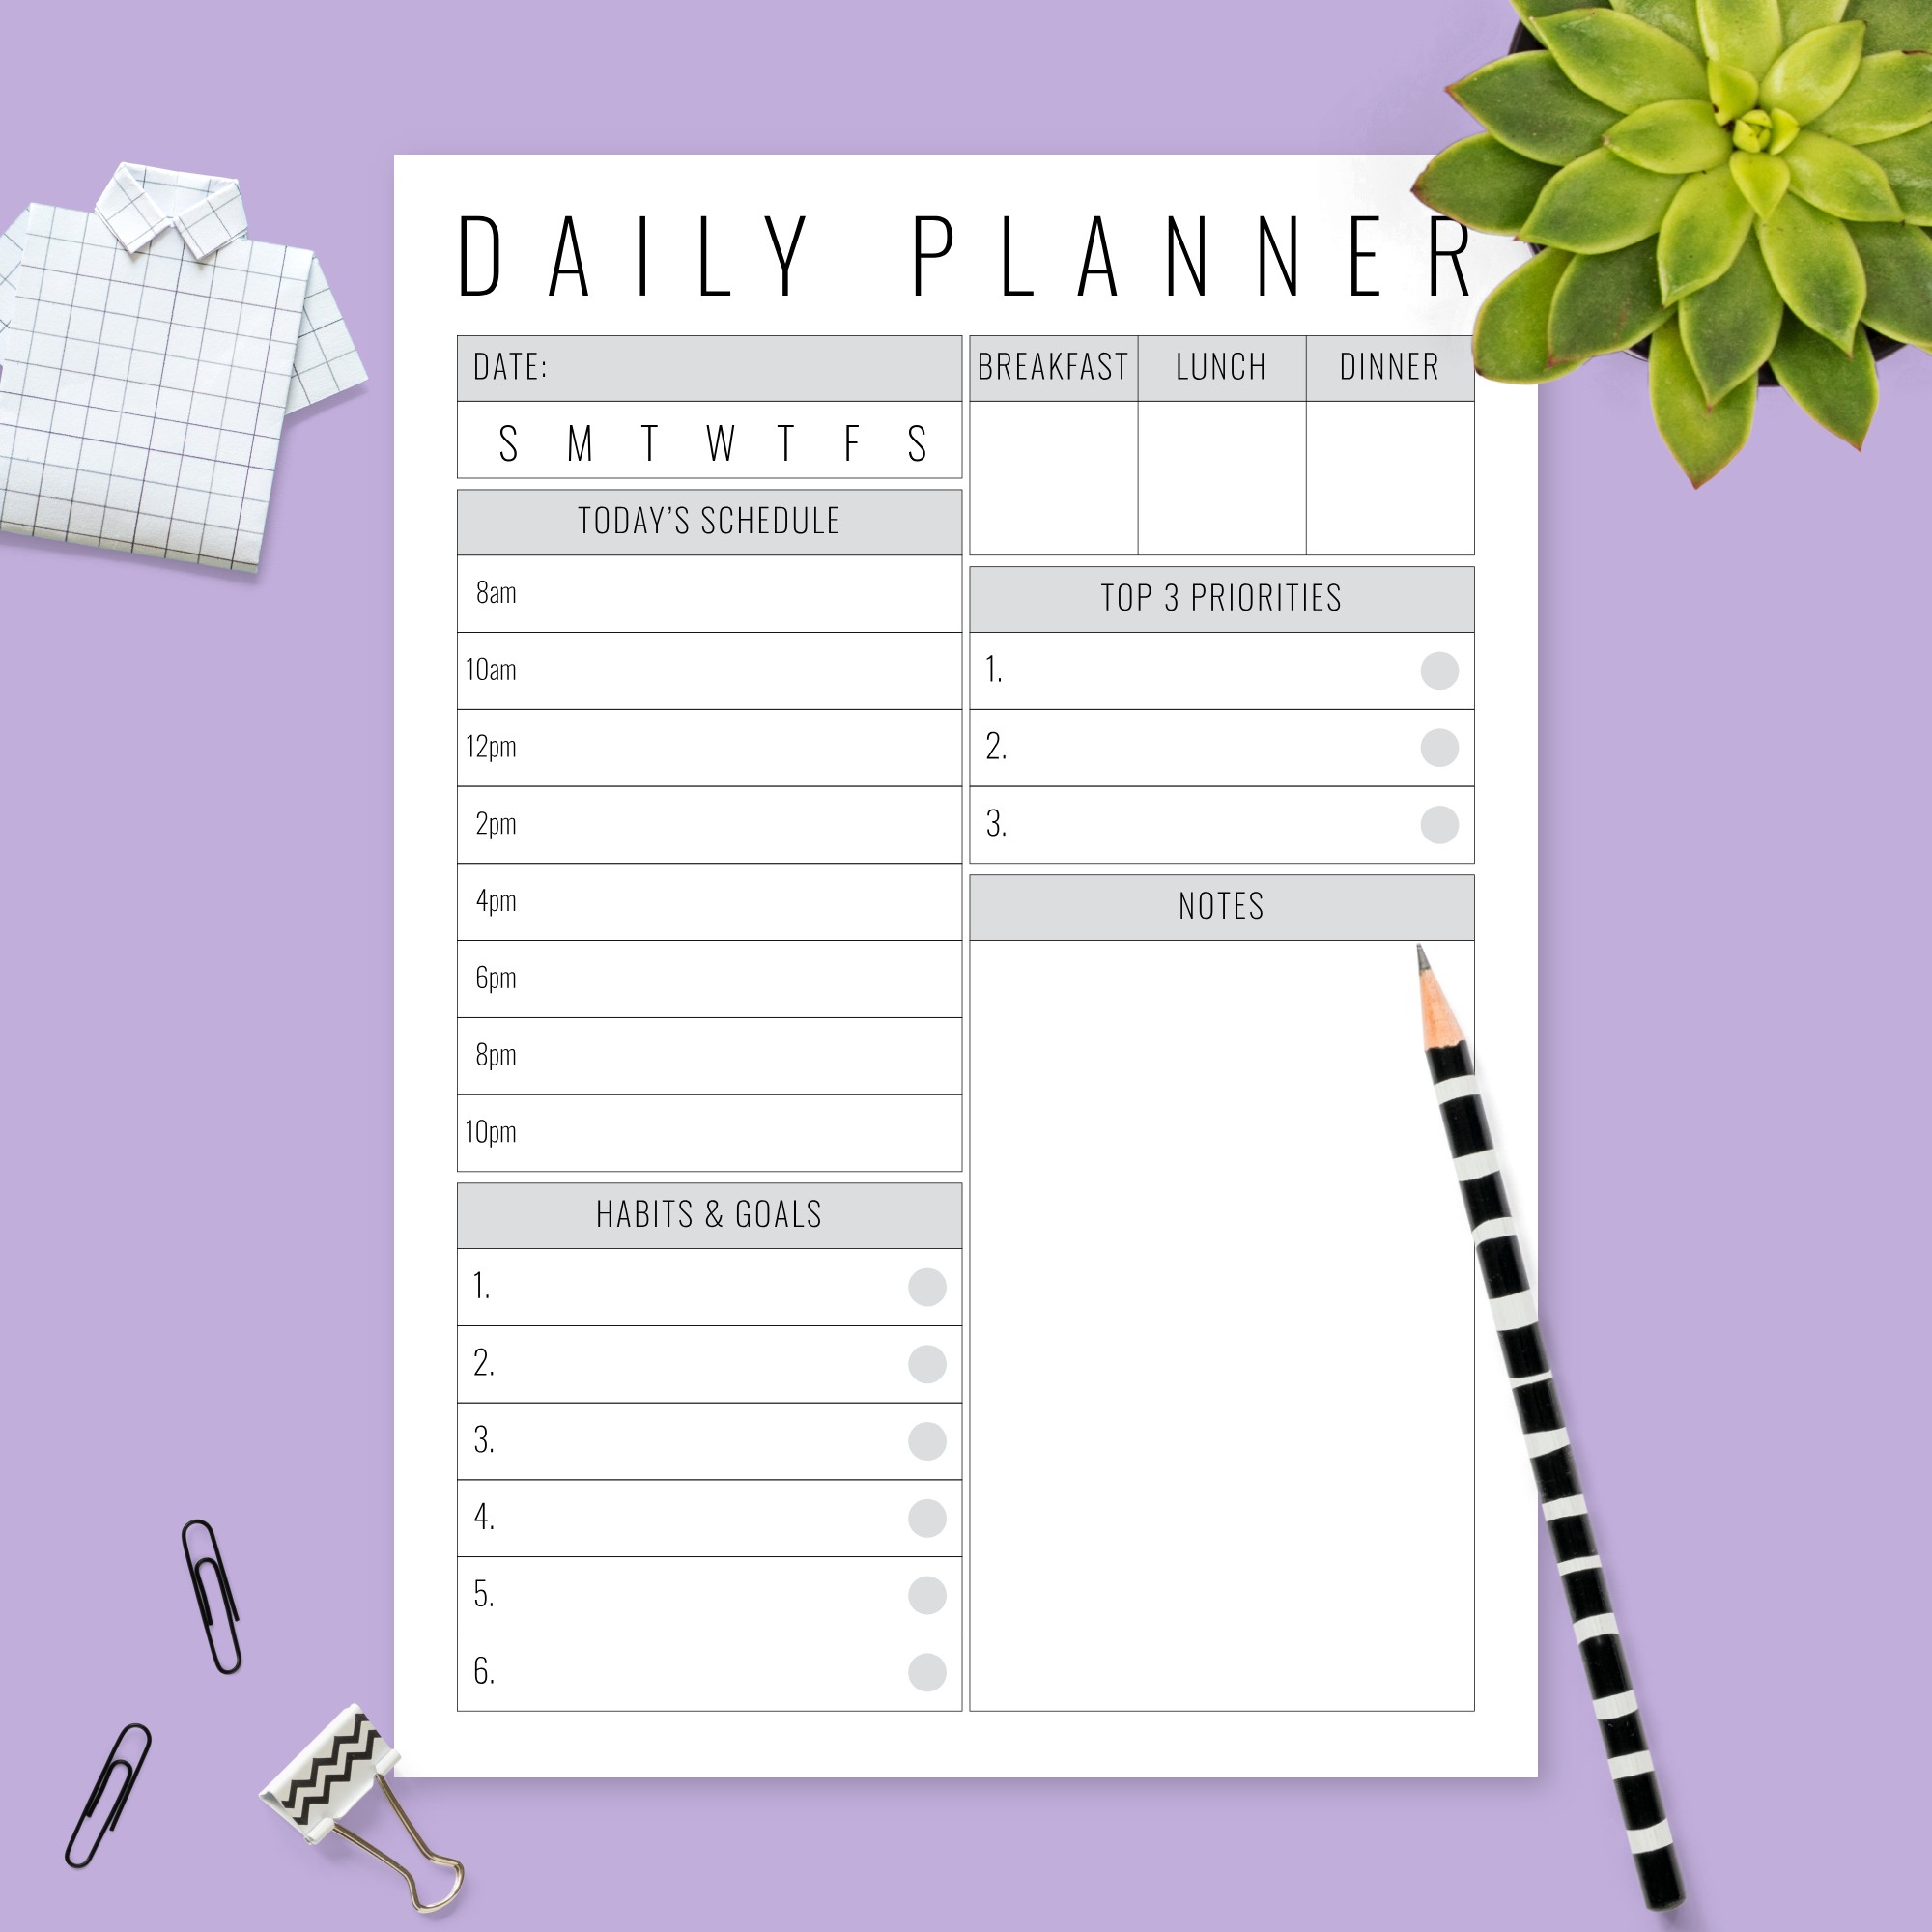 7 Habits Daily Planner Printable Example Calendar Printable Images